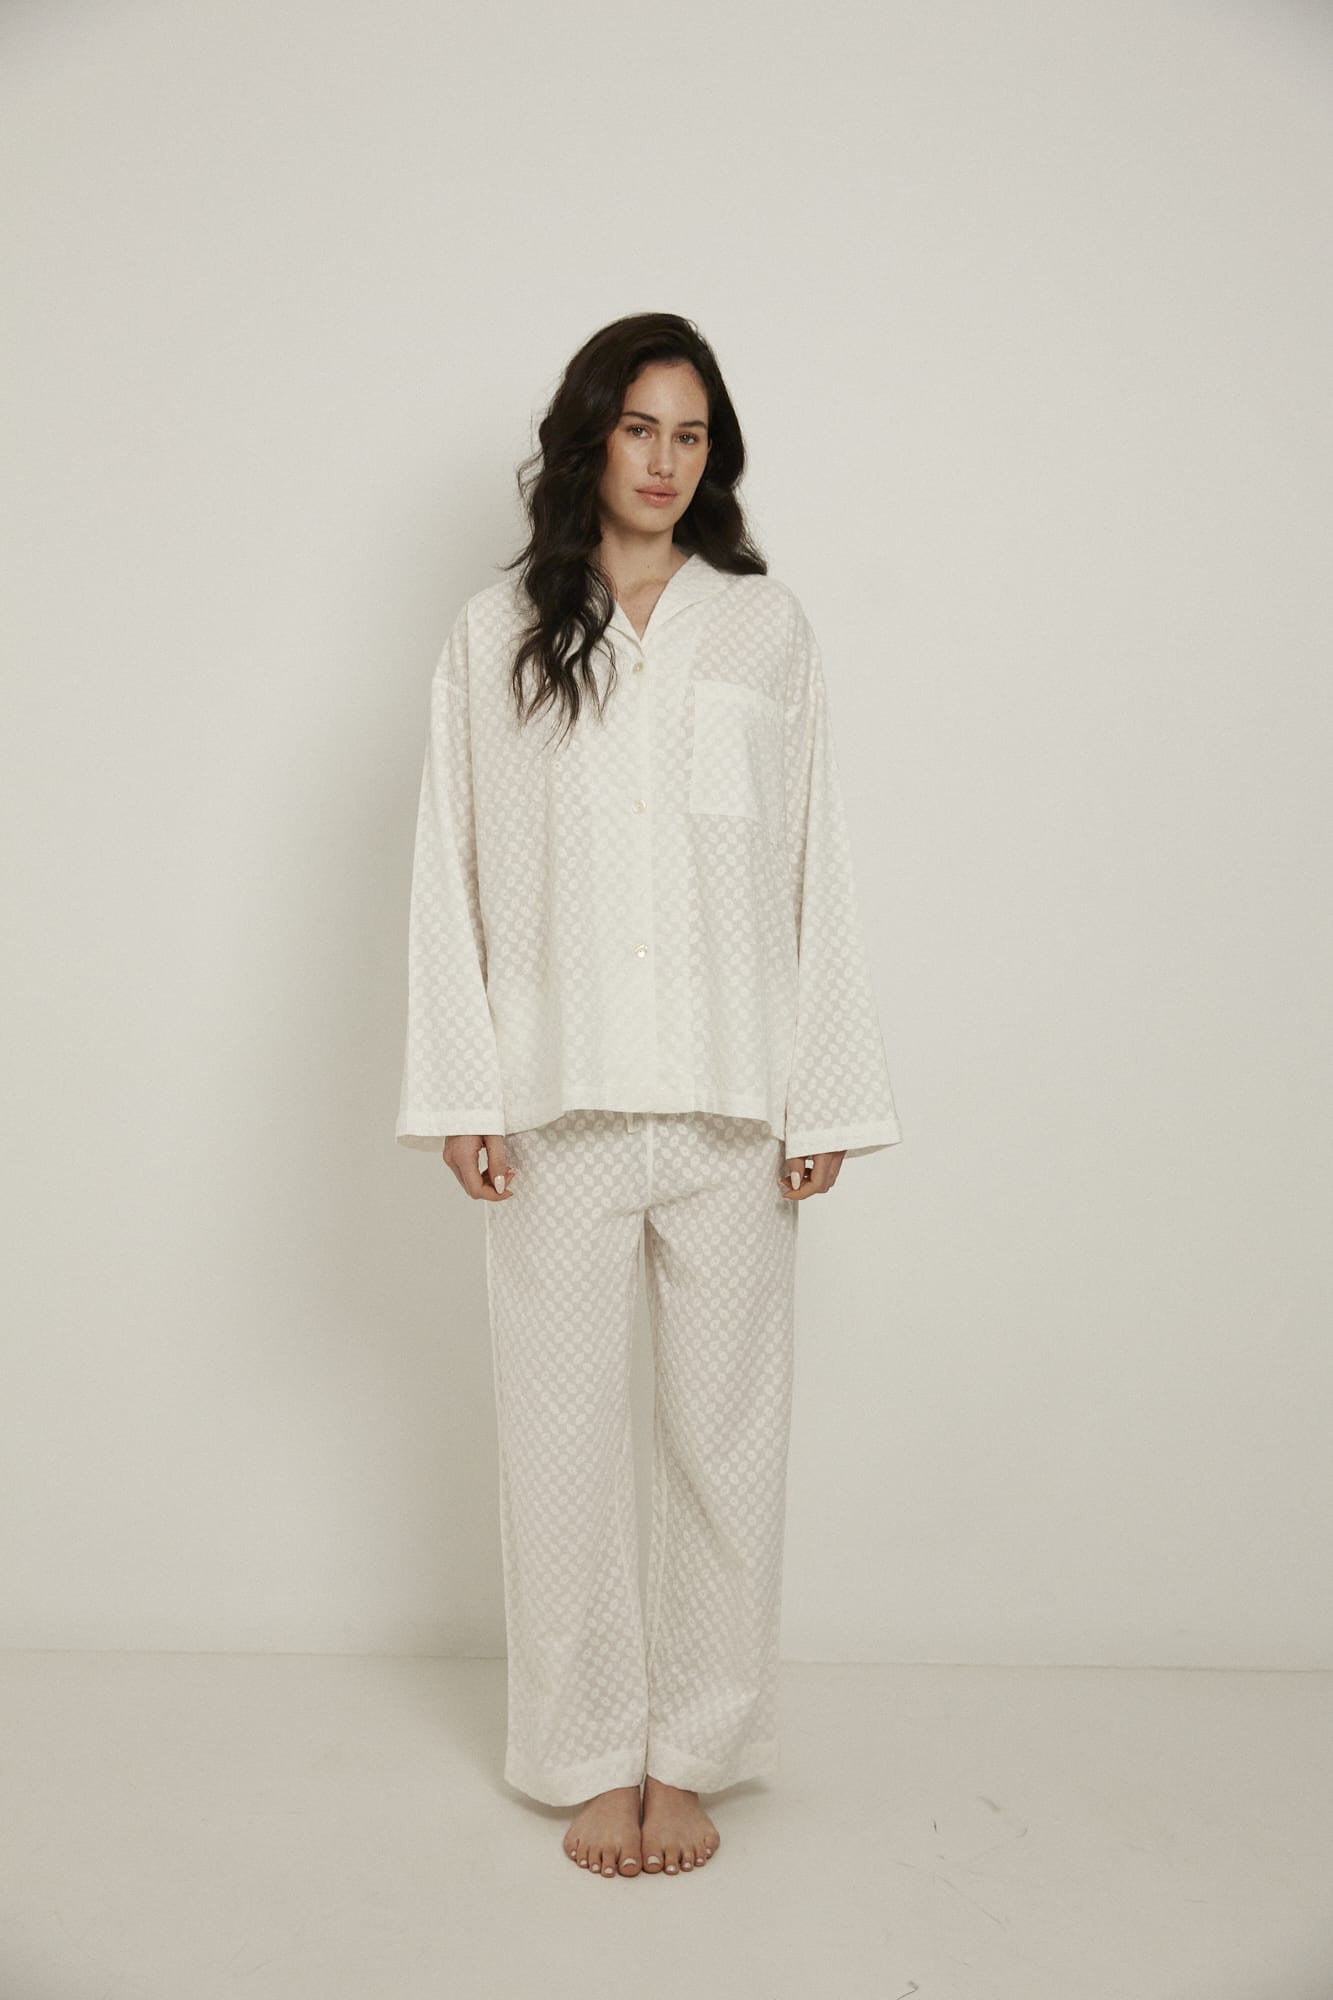 Women’s sleepwear set featuring an oversized, dropped-shoulder, button-through shirt, with natural shell buttons.  The loose-fit, straight-leg pants have an elasticated waist, flat front, and drawstring detail, and are comfortable and flattering. Made from white, 100% organic cotton, both pieces have been finished with French seams and feature delicate all-over embroidery.